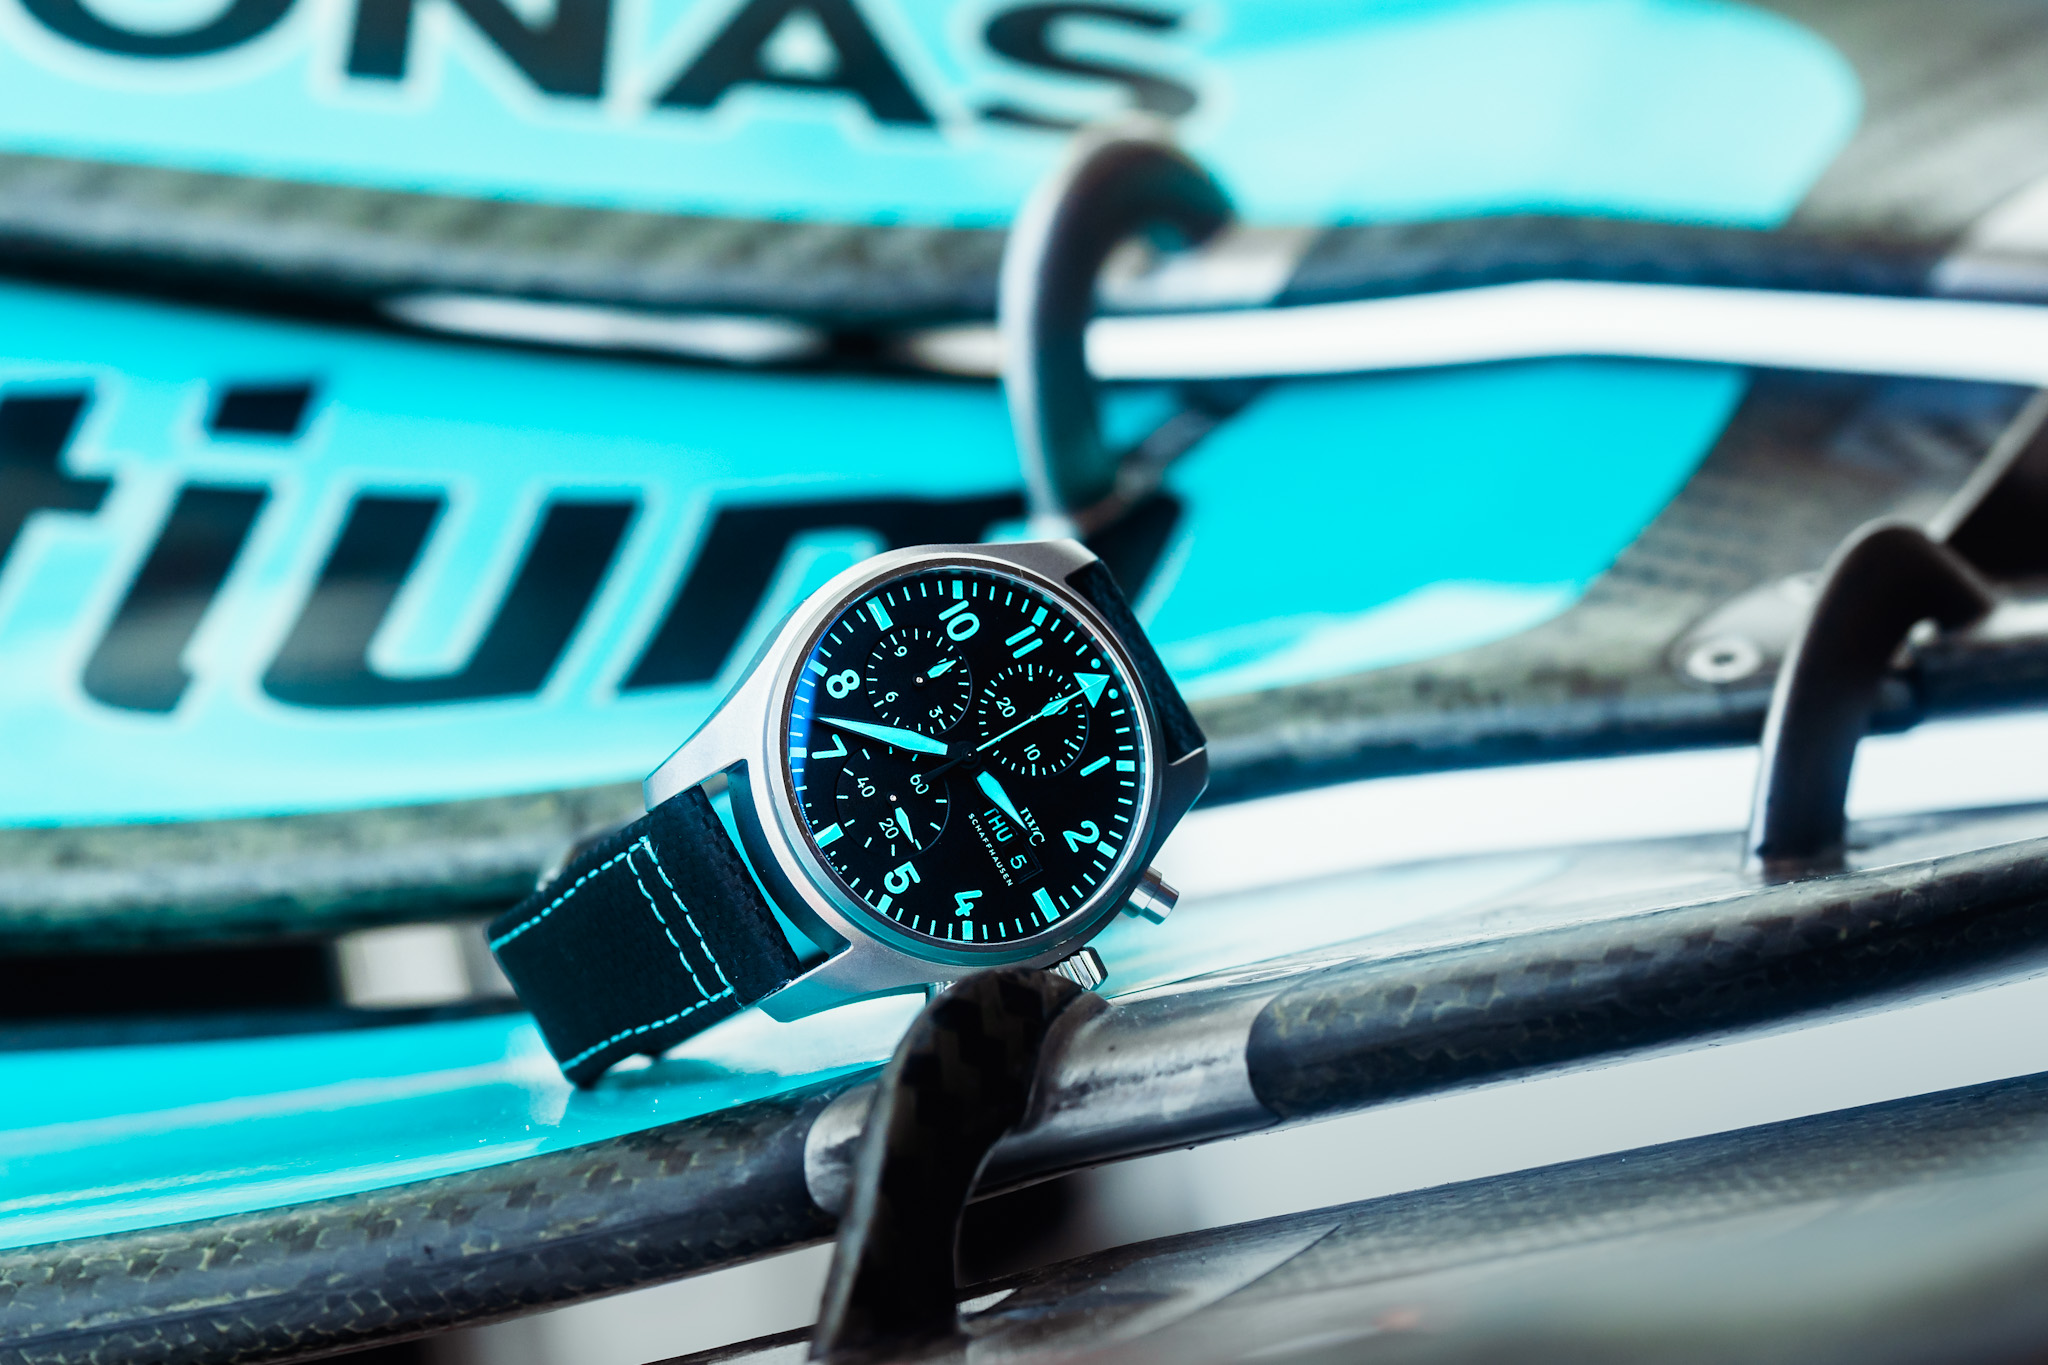 Watch-Spotting In The Grandstands With IWC At The 2022 Miami F1